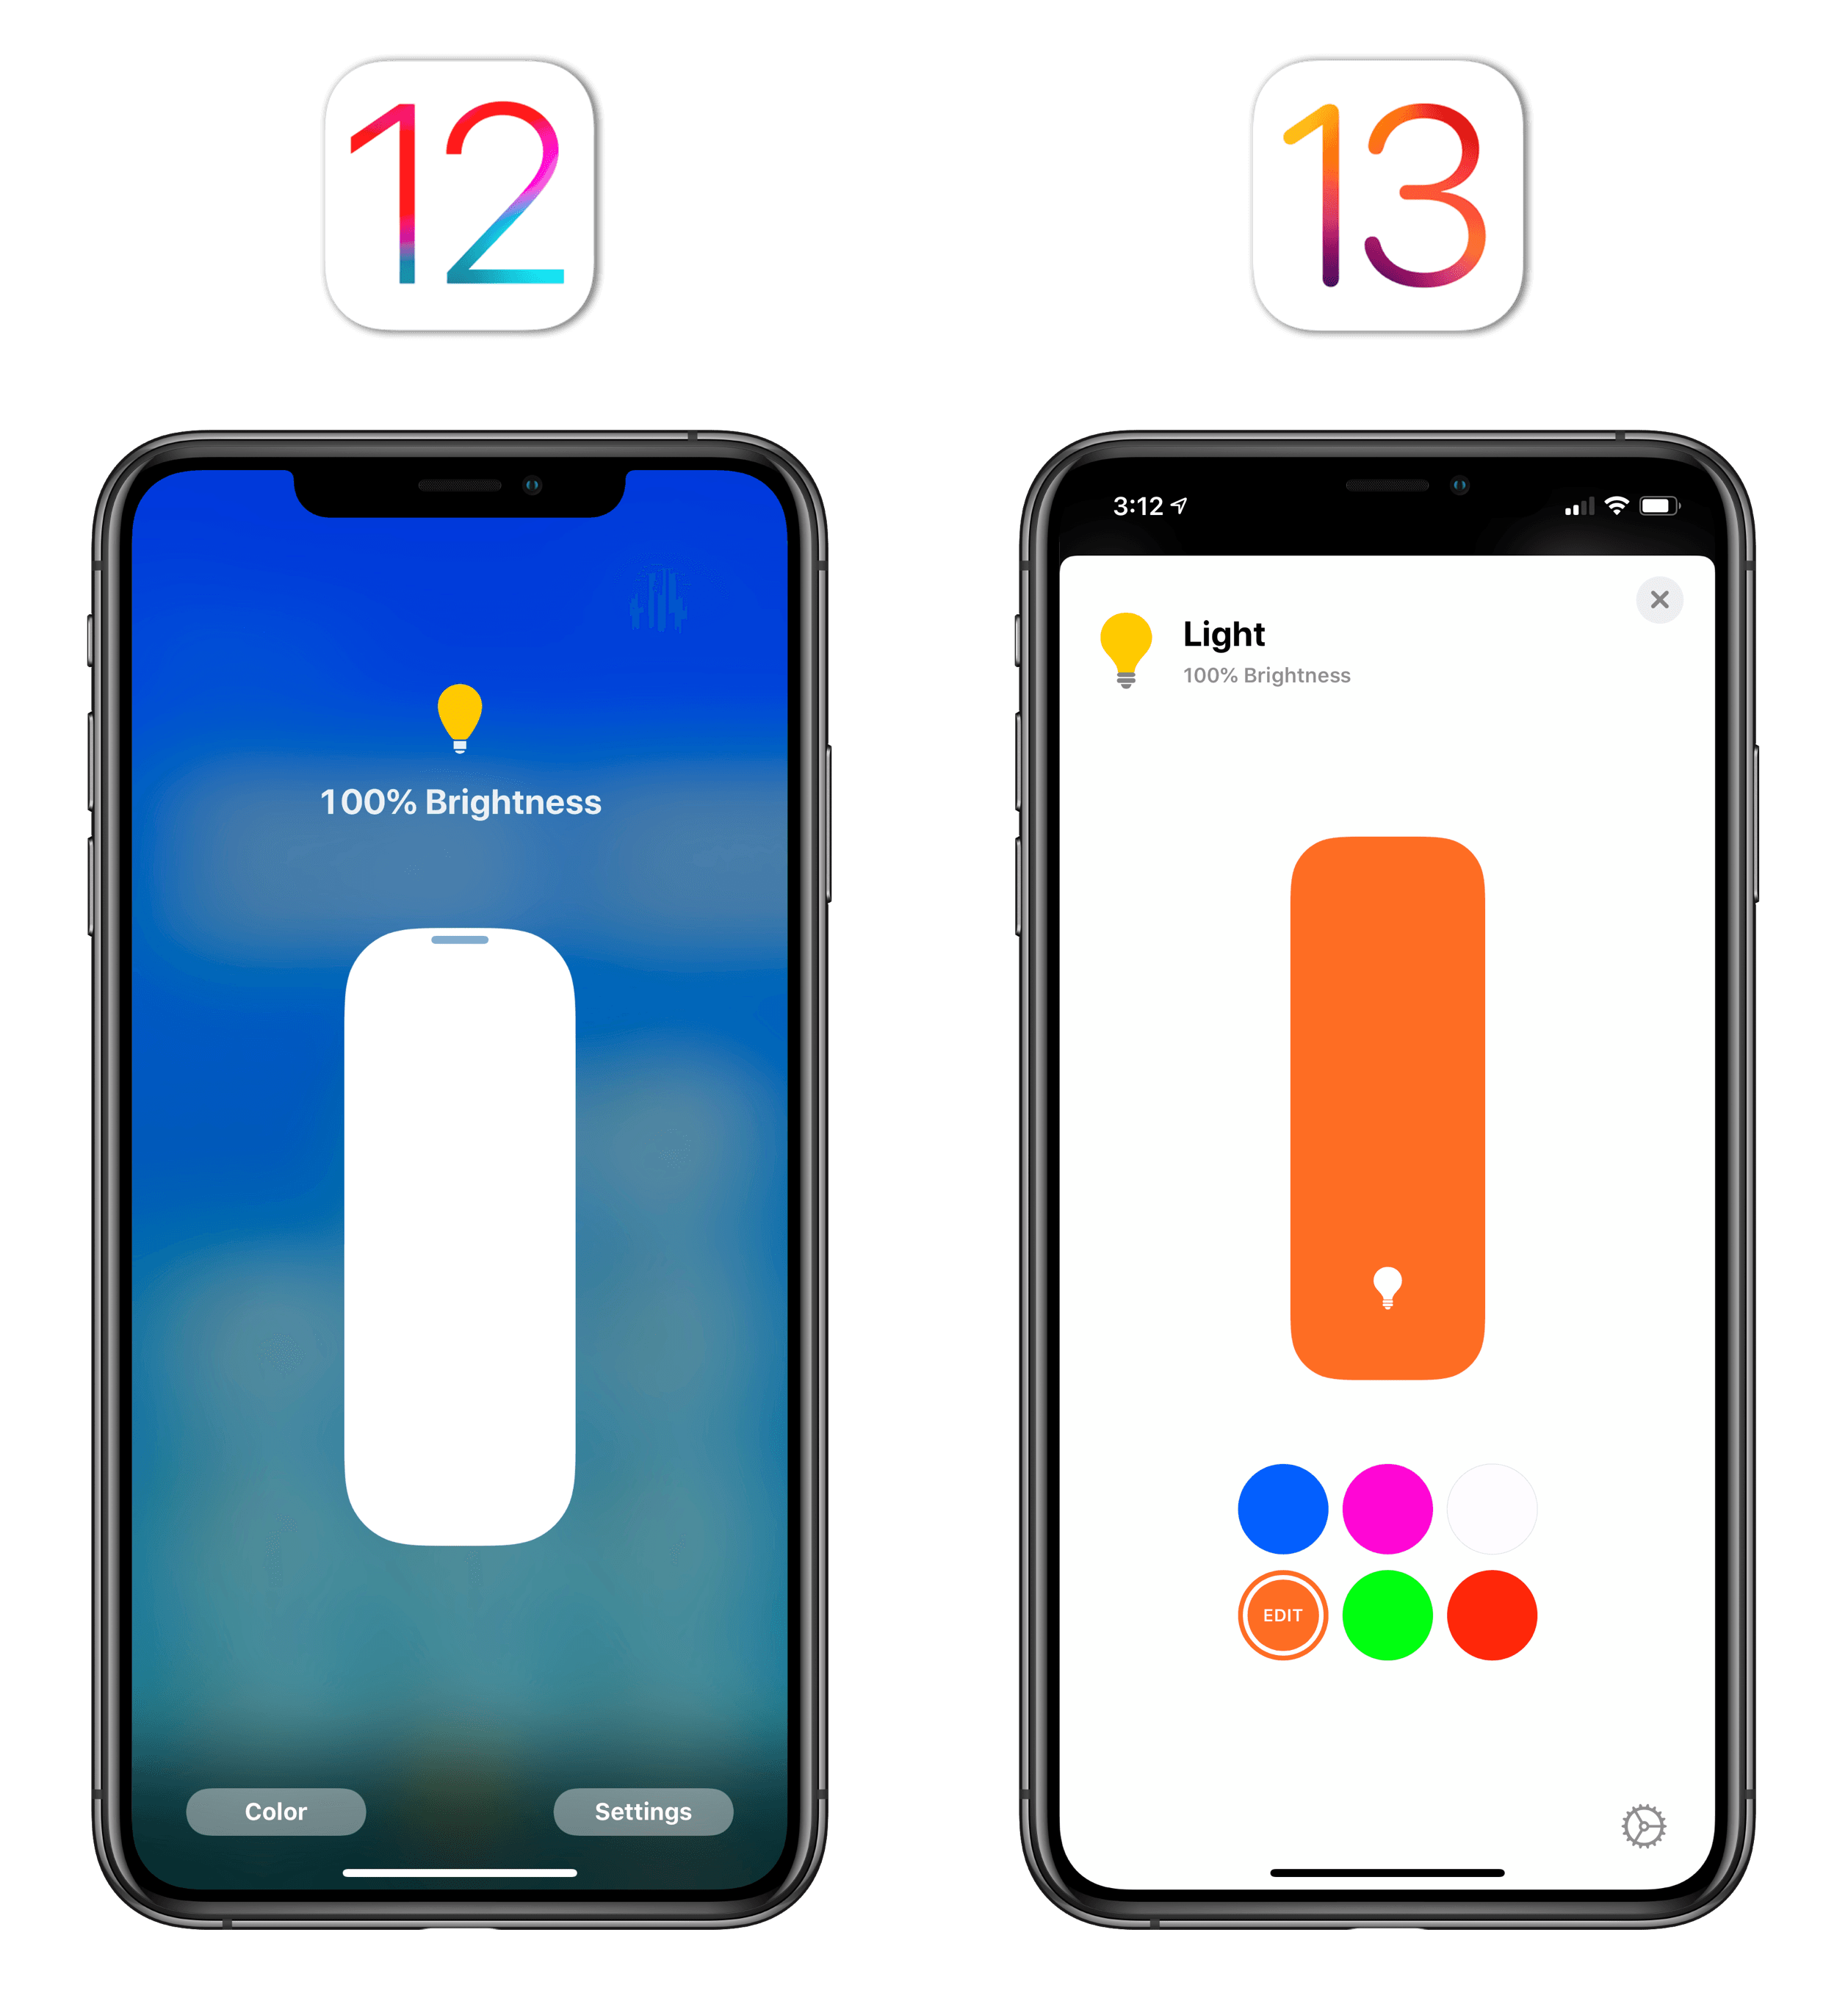 In iOS 13.1, there are also new accessory icons to choose from, which animate slightly when you interact with them. It's a nice touch.